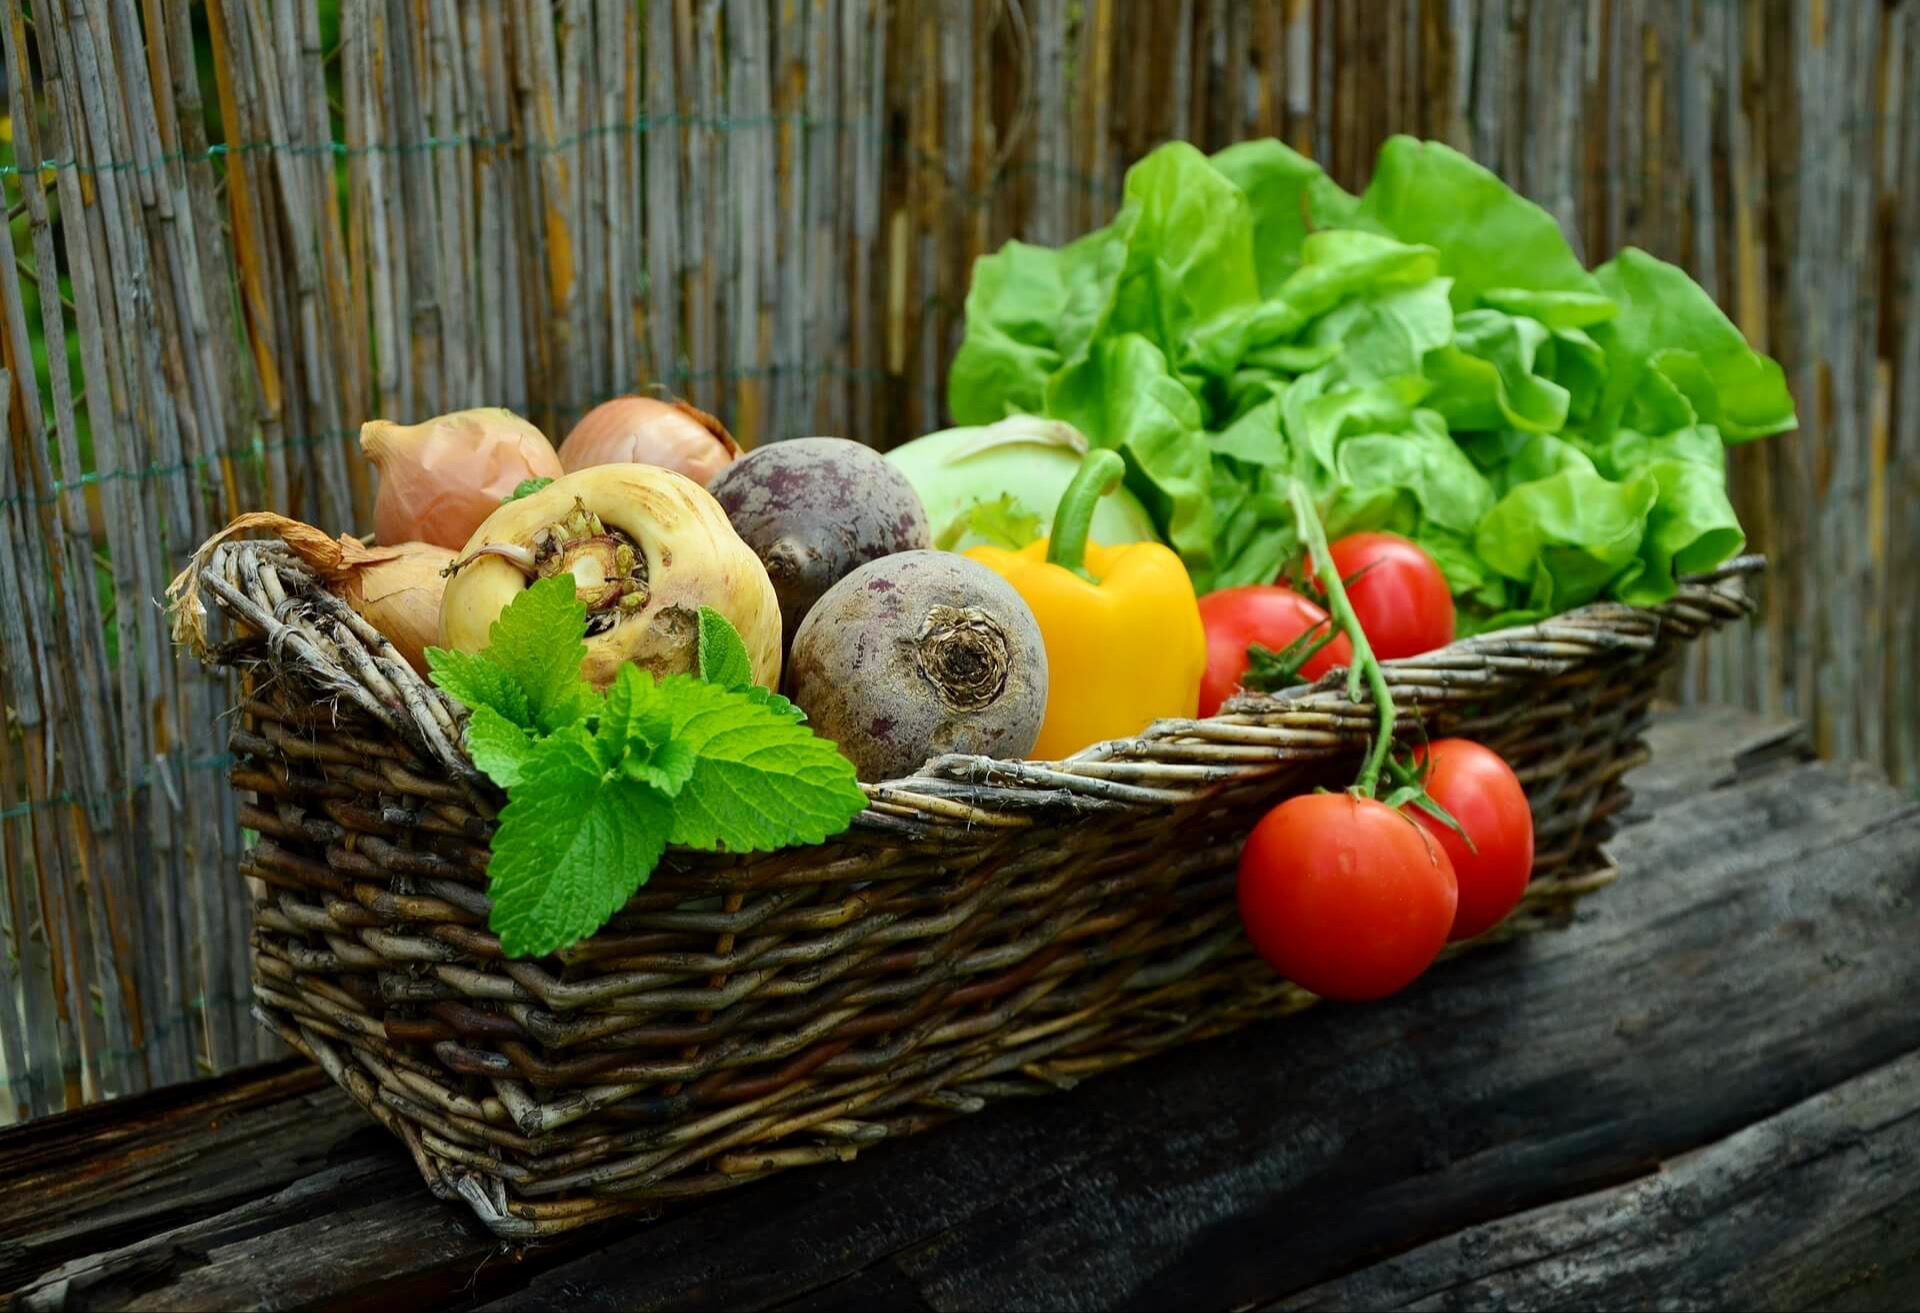 7 Easy Ways to Access Fresh Produce and Increase Local Food Security